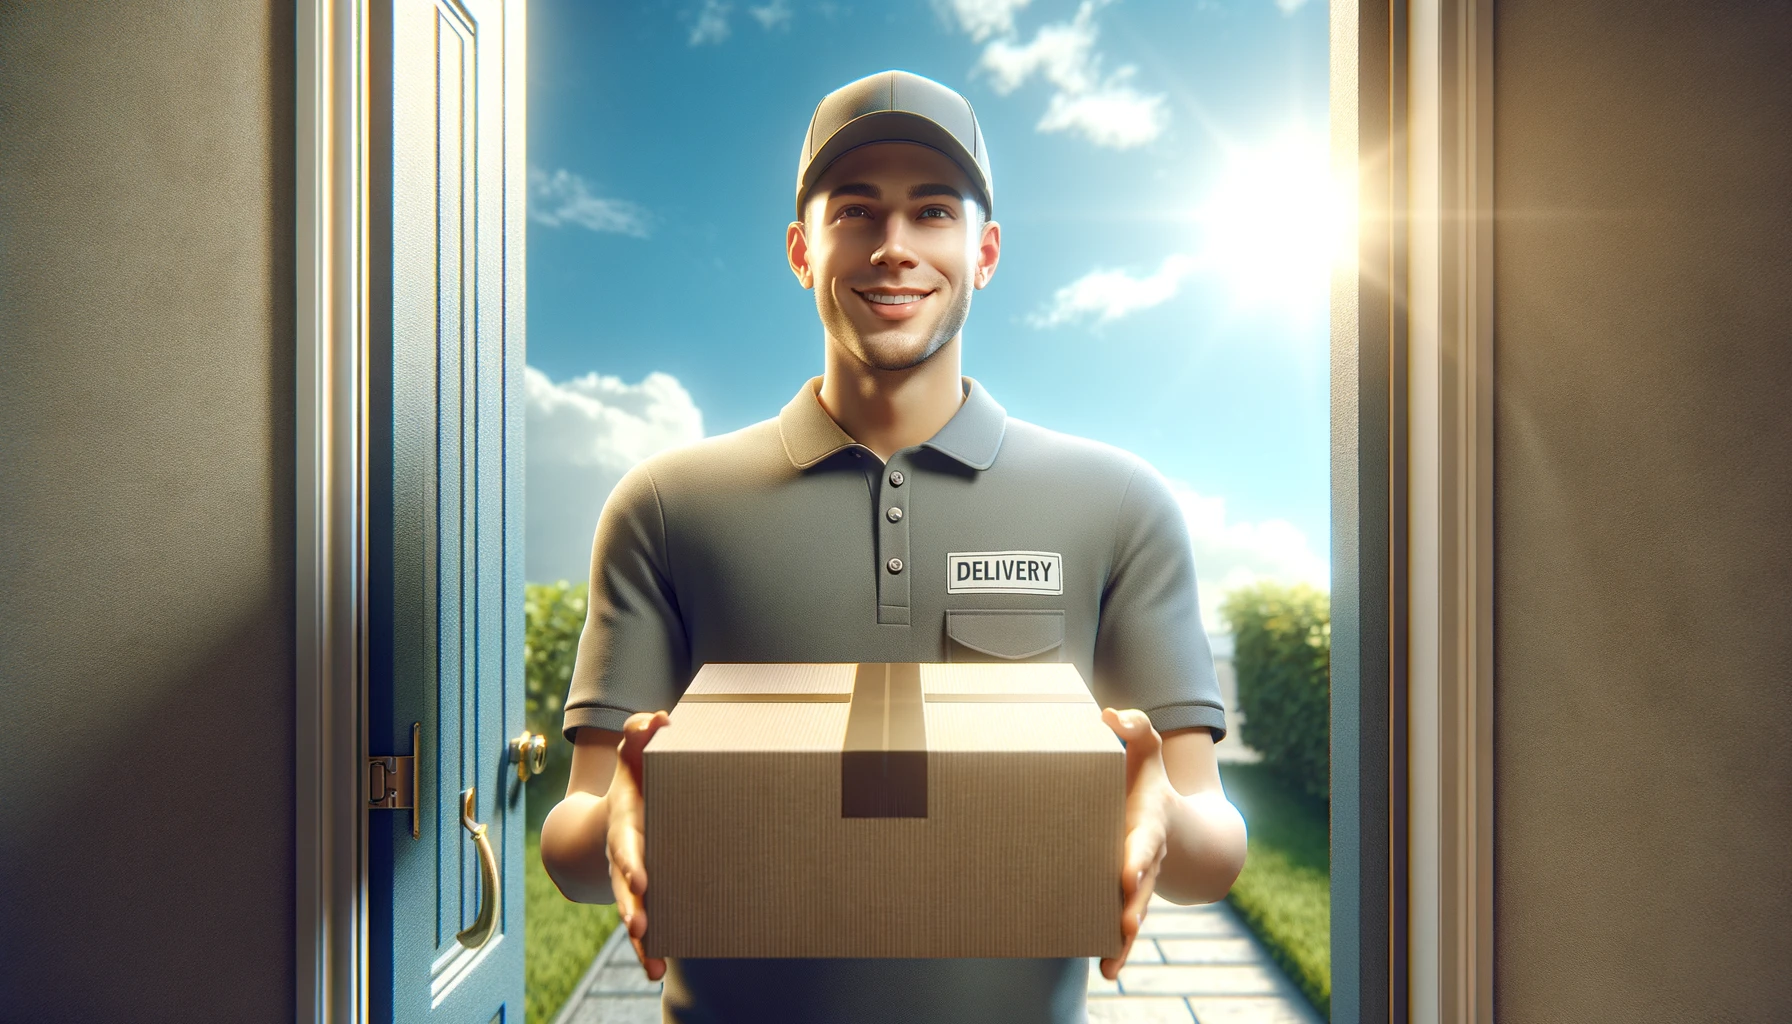 Delivery person in a generic uniform, standing on a door step facing the viewer, as if delivering a package to the